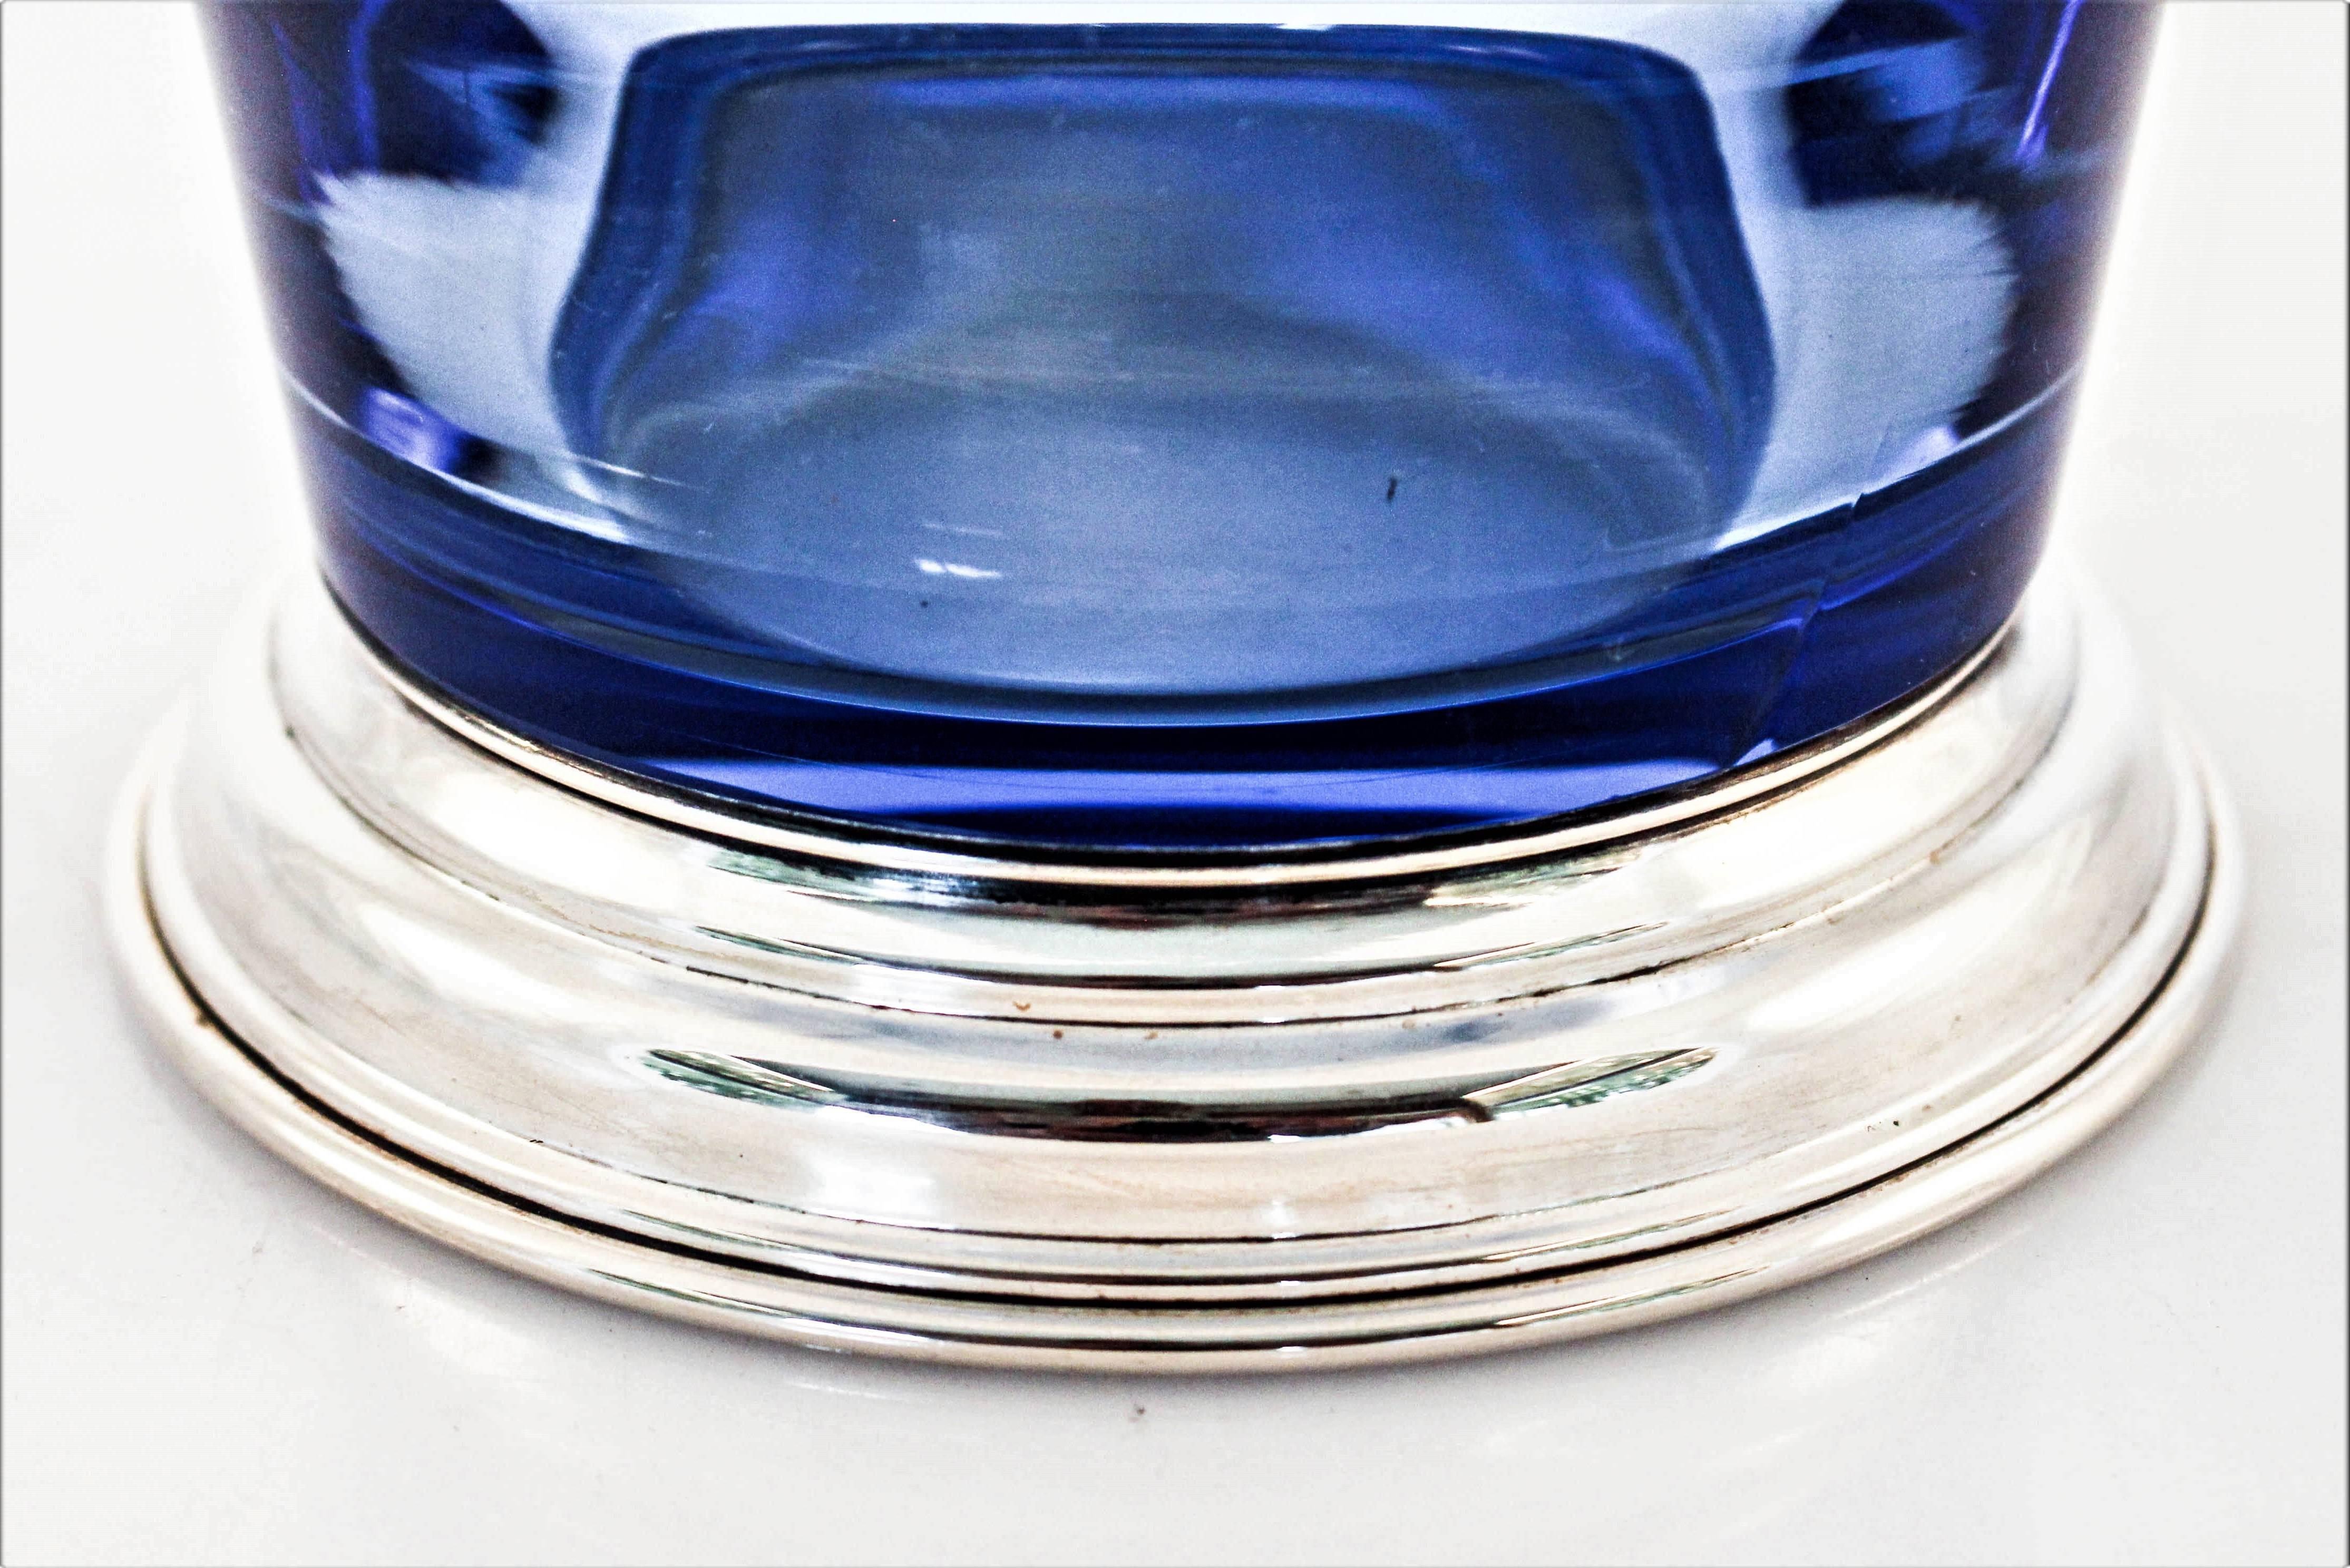 We have neither seen nor had a vase with this color before; a cobalt blue on the bottom and a lighter shade of blue towards the top. The talented people at the world renowned Hawkes Glass Company made it so that the blue gets lighter in color as you